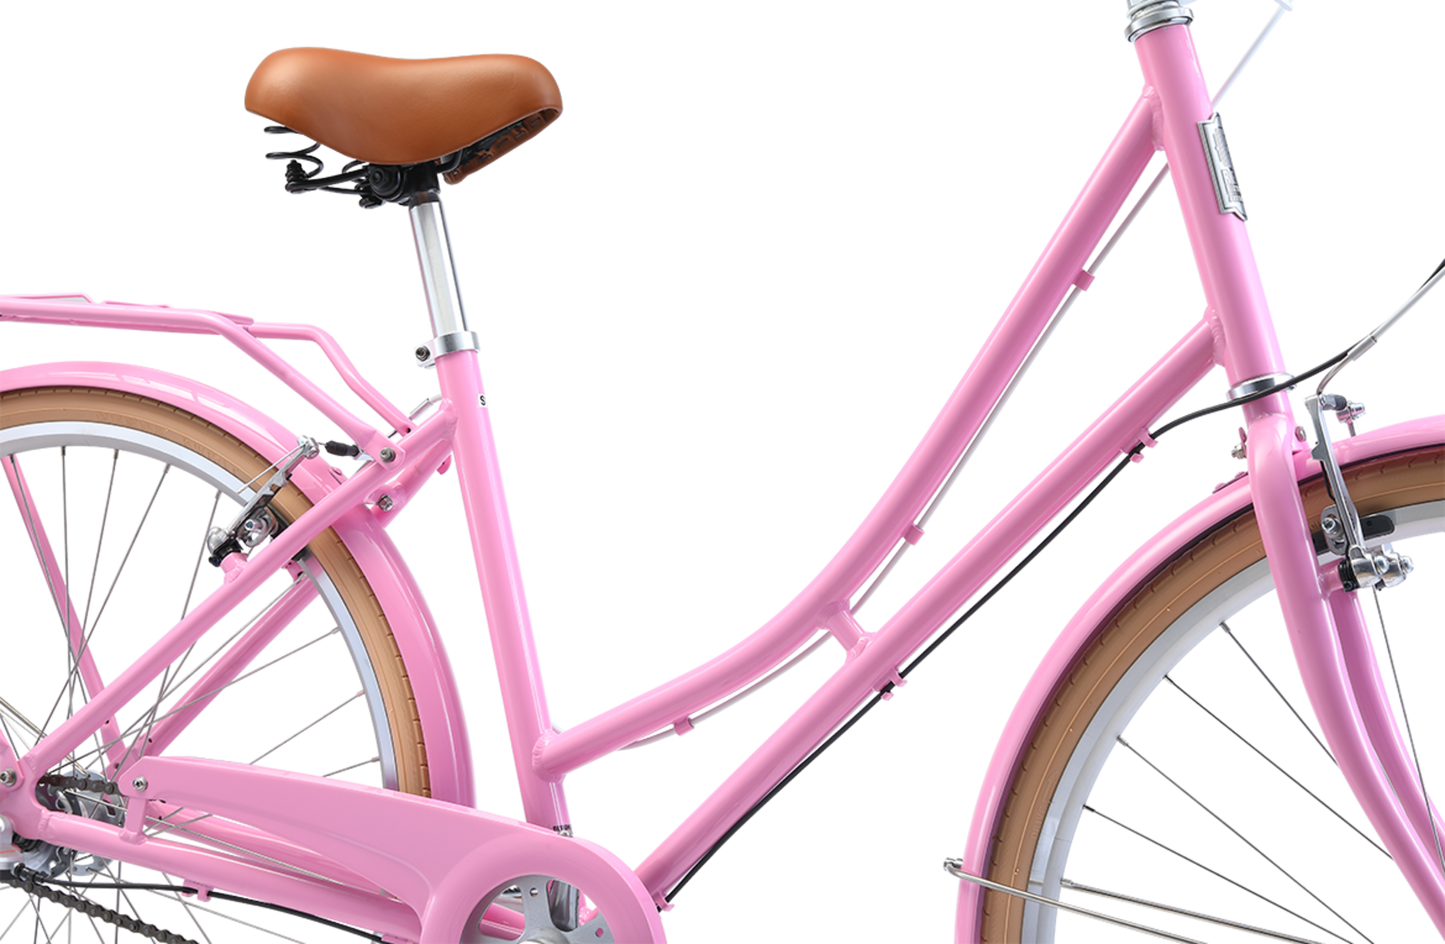 Ladies Deluxe Vintage Bike in Pink showing compfy saddle and pannier rack from Reid Cycles Australia